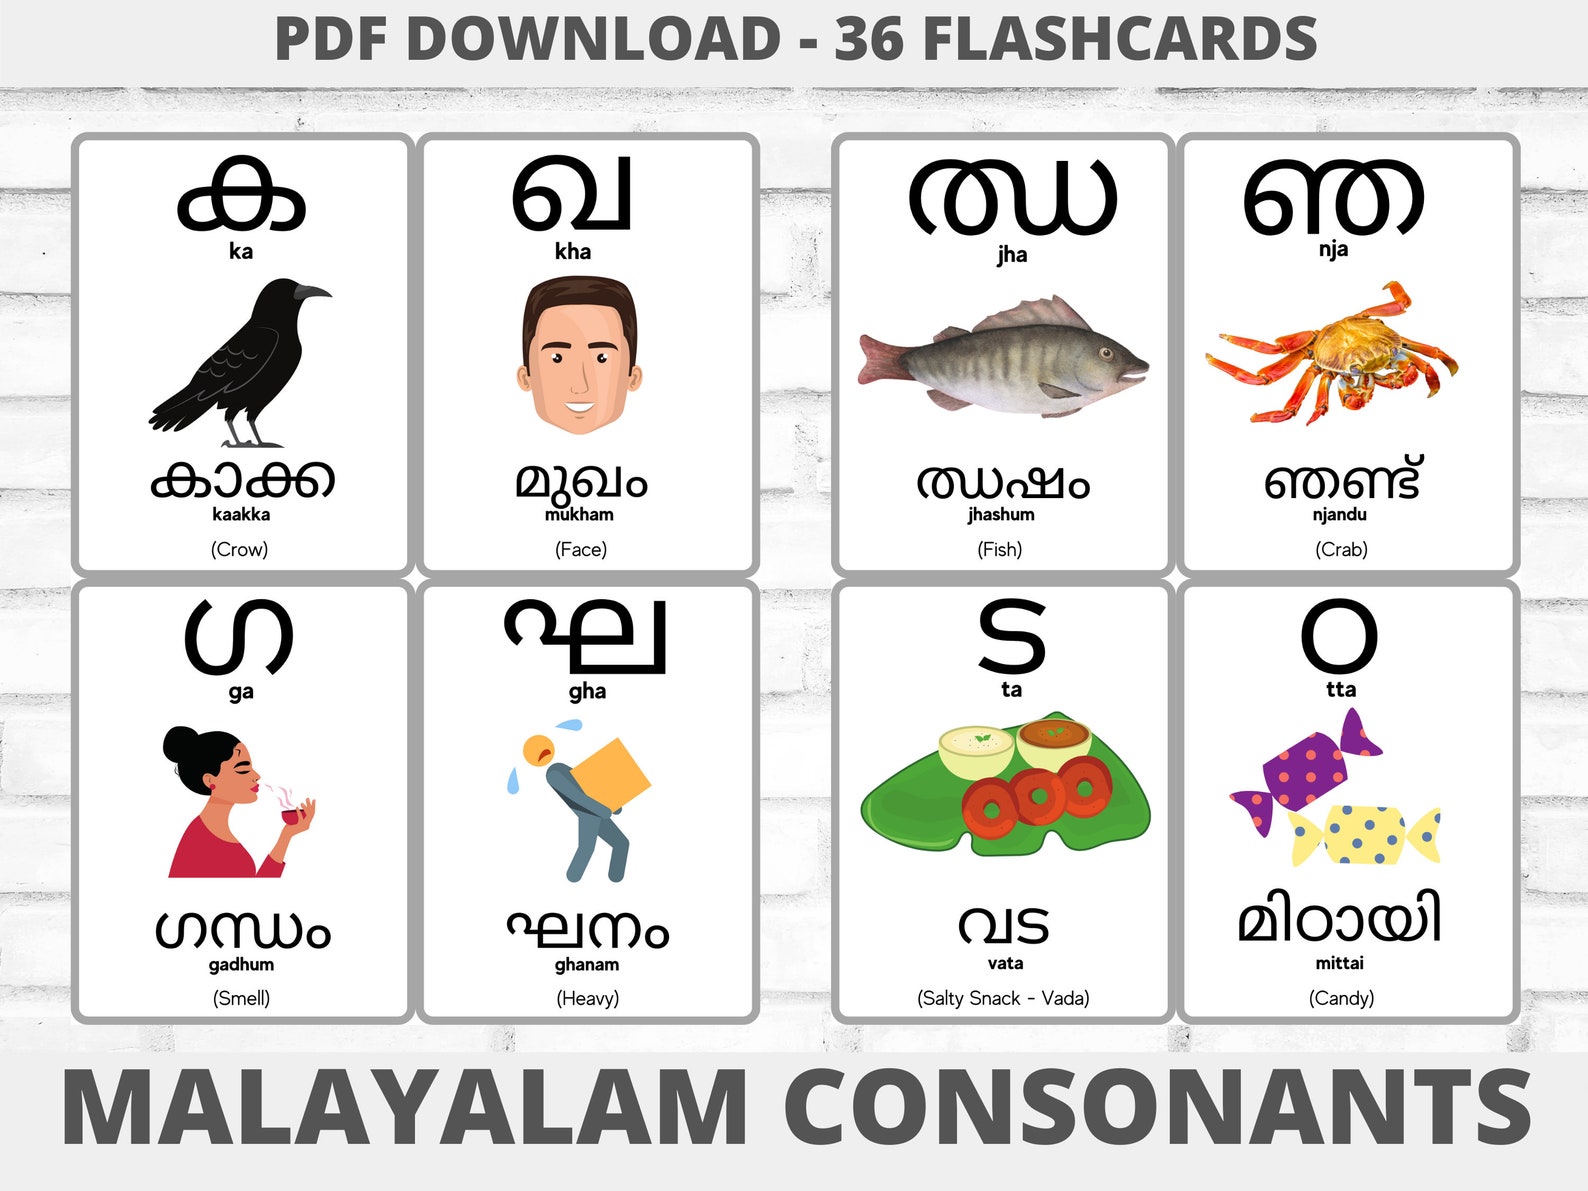 voyager word meaning in malayalam